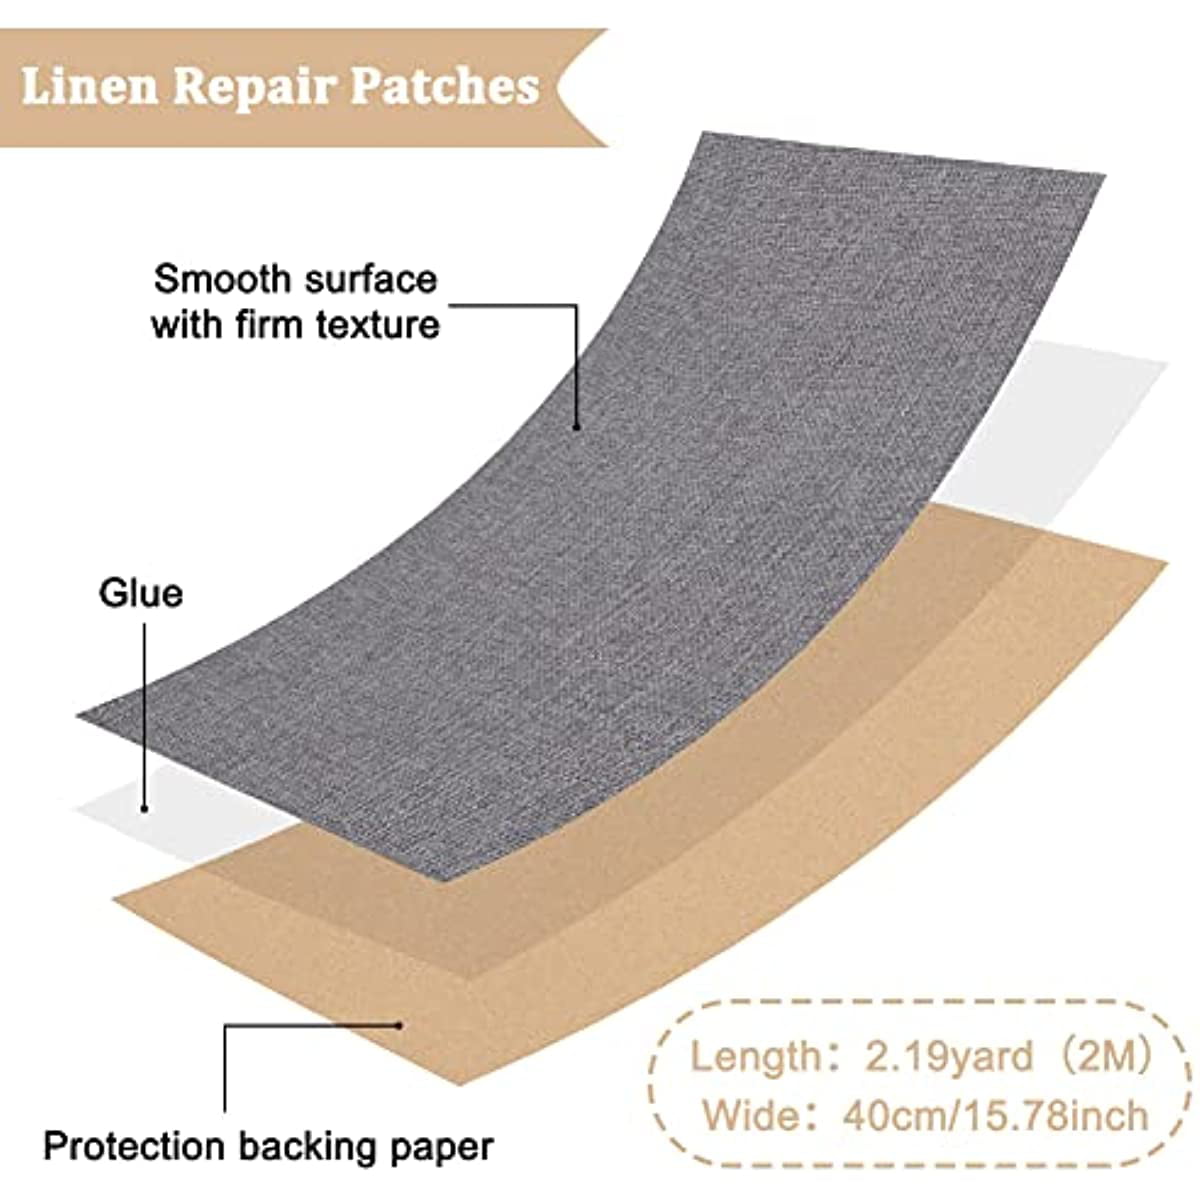  Fine Linen Repair Patches, Self-Adhesive Linen Fabric Adhesive,  8X11 inch Extra Size, Multi Color, Can be Used for Linen Sofa Repair,Throw  Pillows,All Linen Fabric Items Repair.(Platinum Gray)